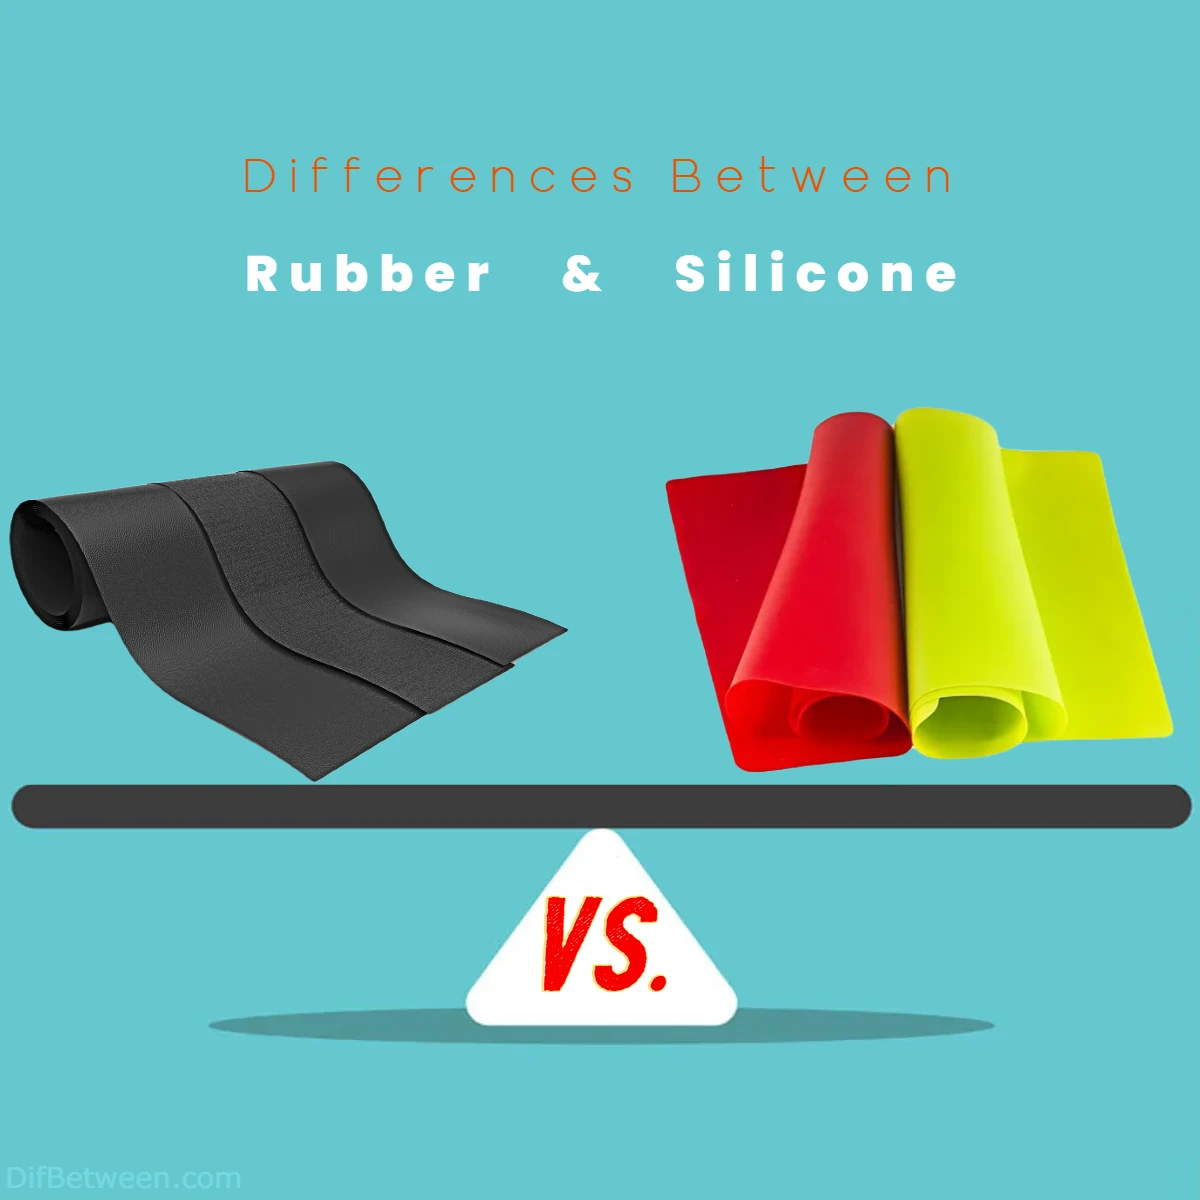 Differences Between Rubber vs Silicone